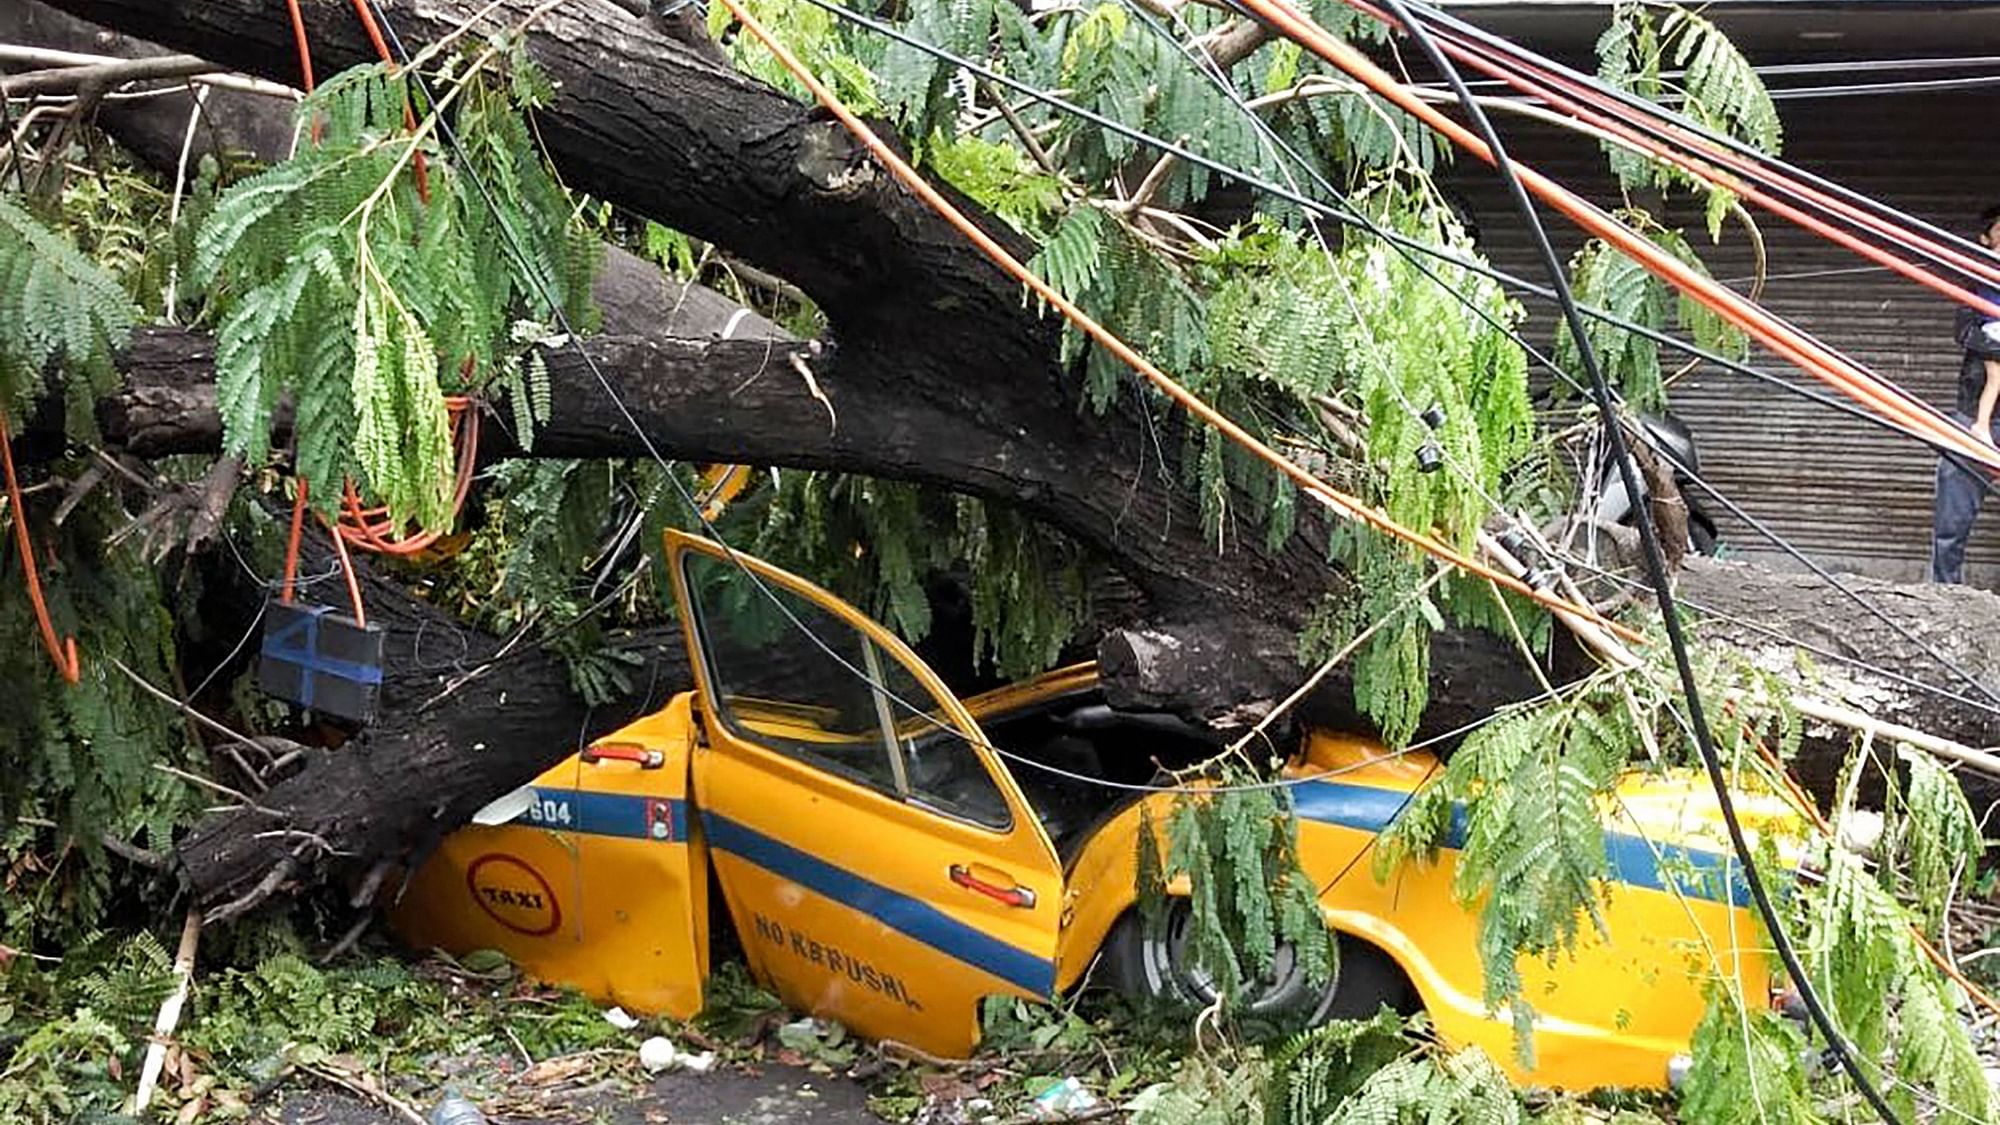 Mangled remains of a taxi after a tree fell on it during Cyclone Amphan, at Dharmatala in Kolkata.&nbsp;